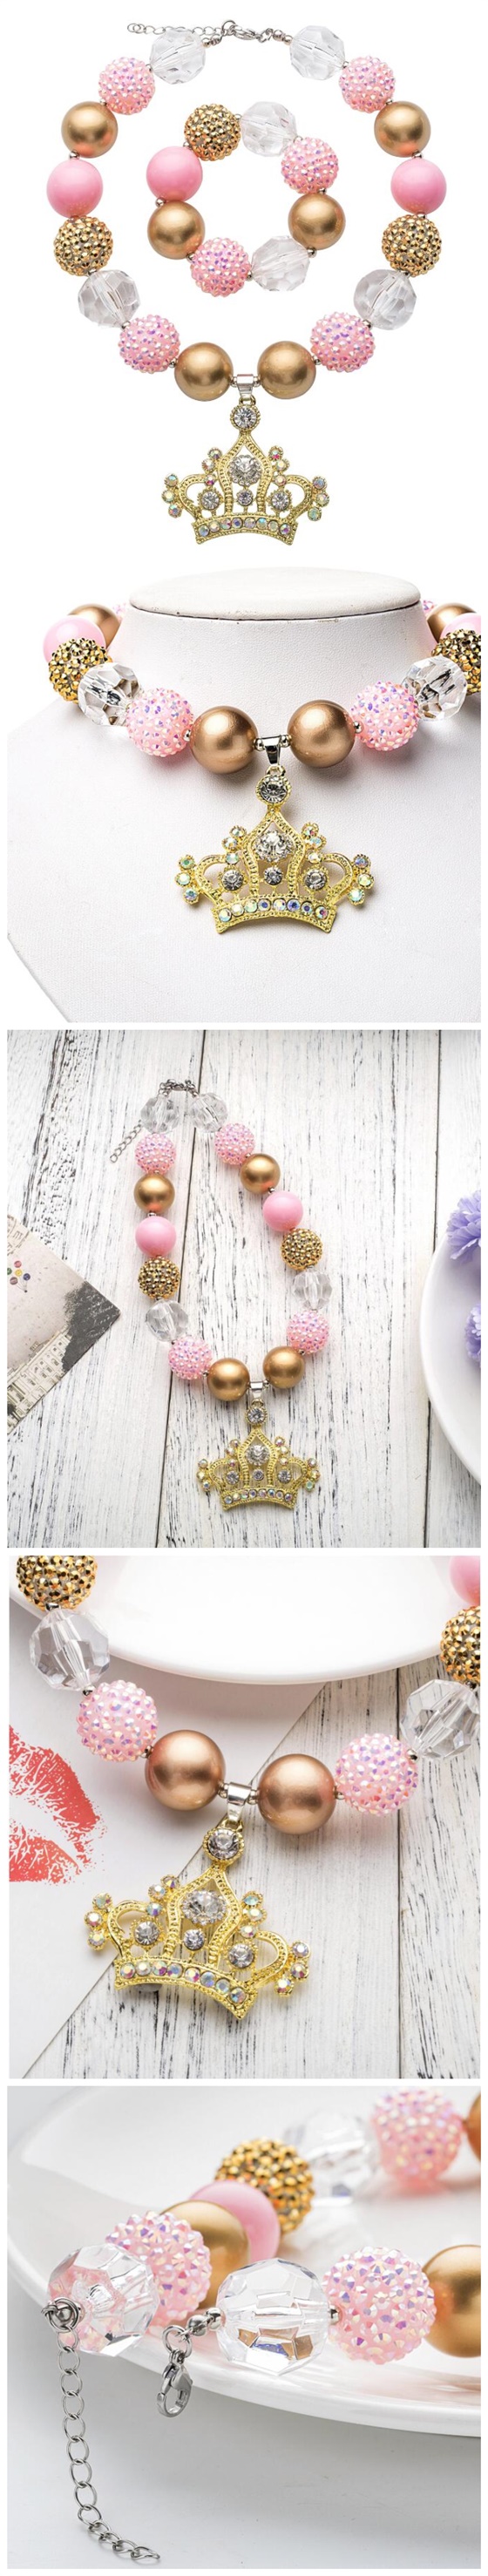 JewelryBund Delicate Crown Pendant Cute Beads Fashion Baby Girl Necklace and Bracelet Jewelry Set